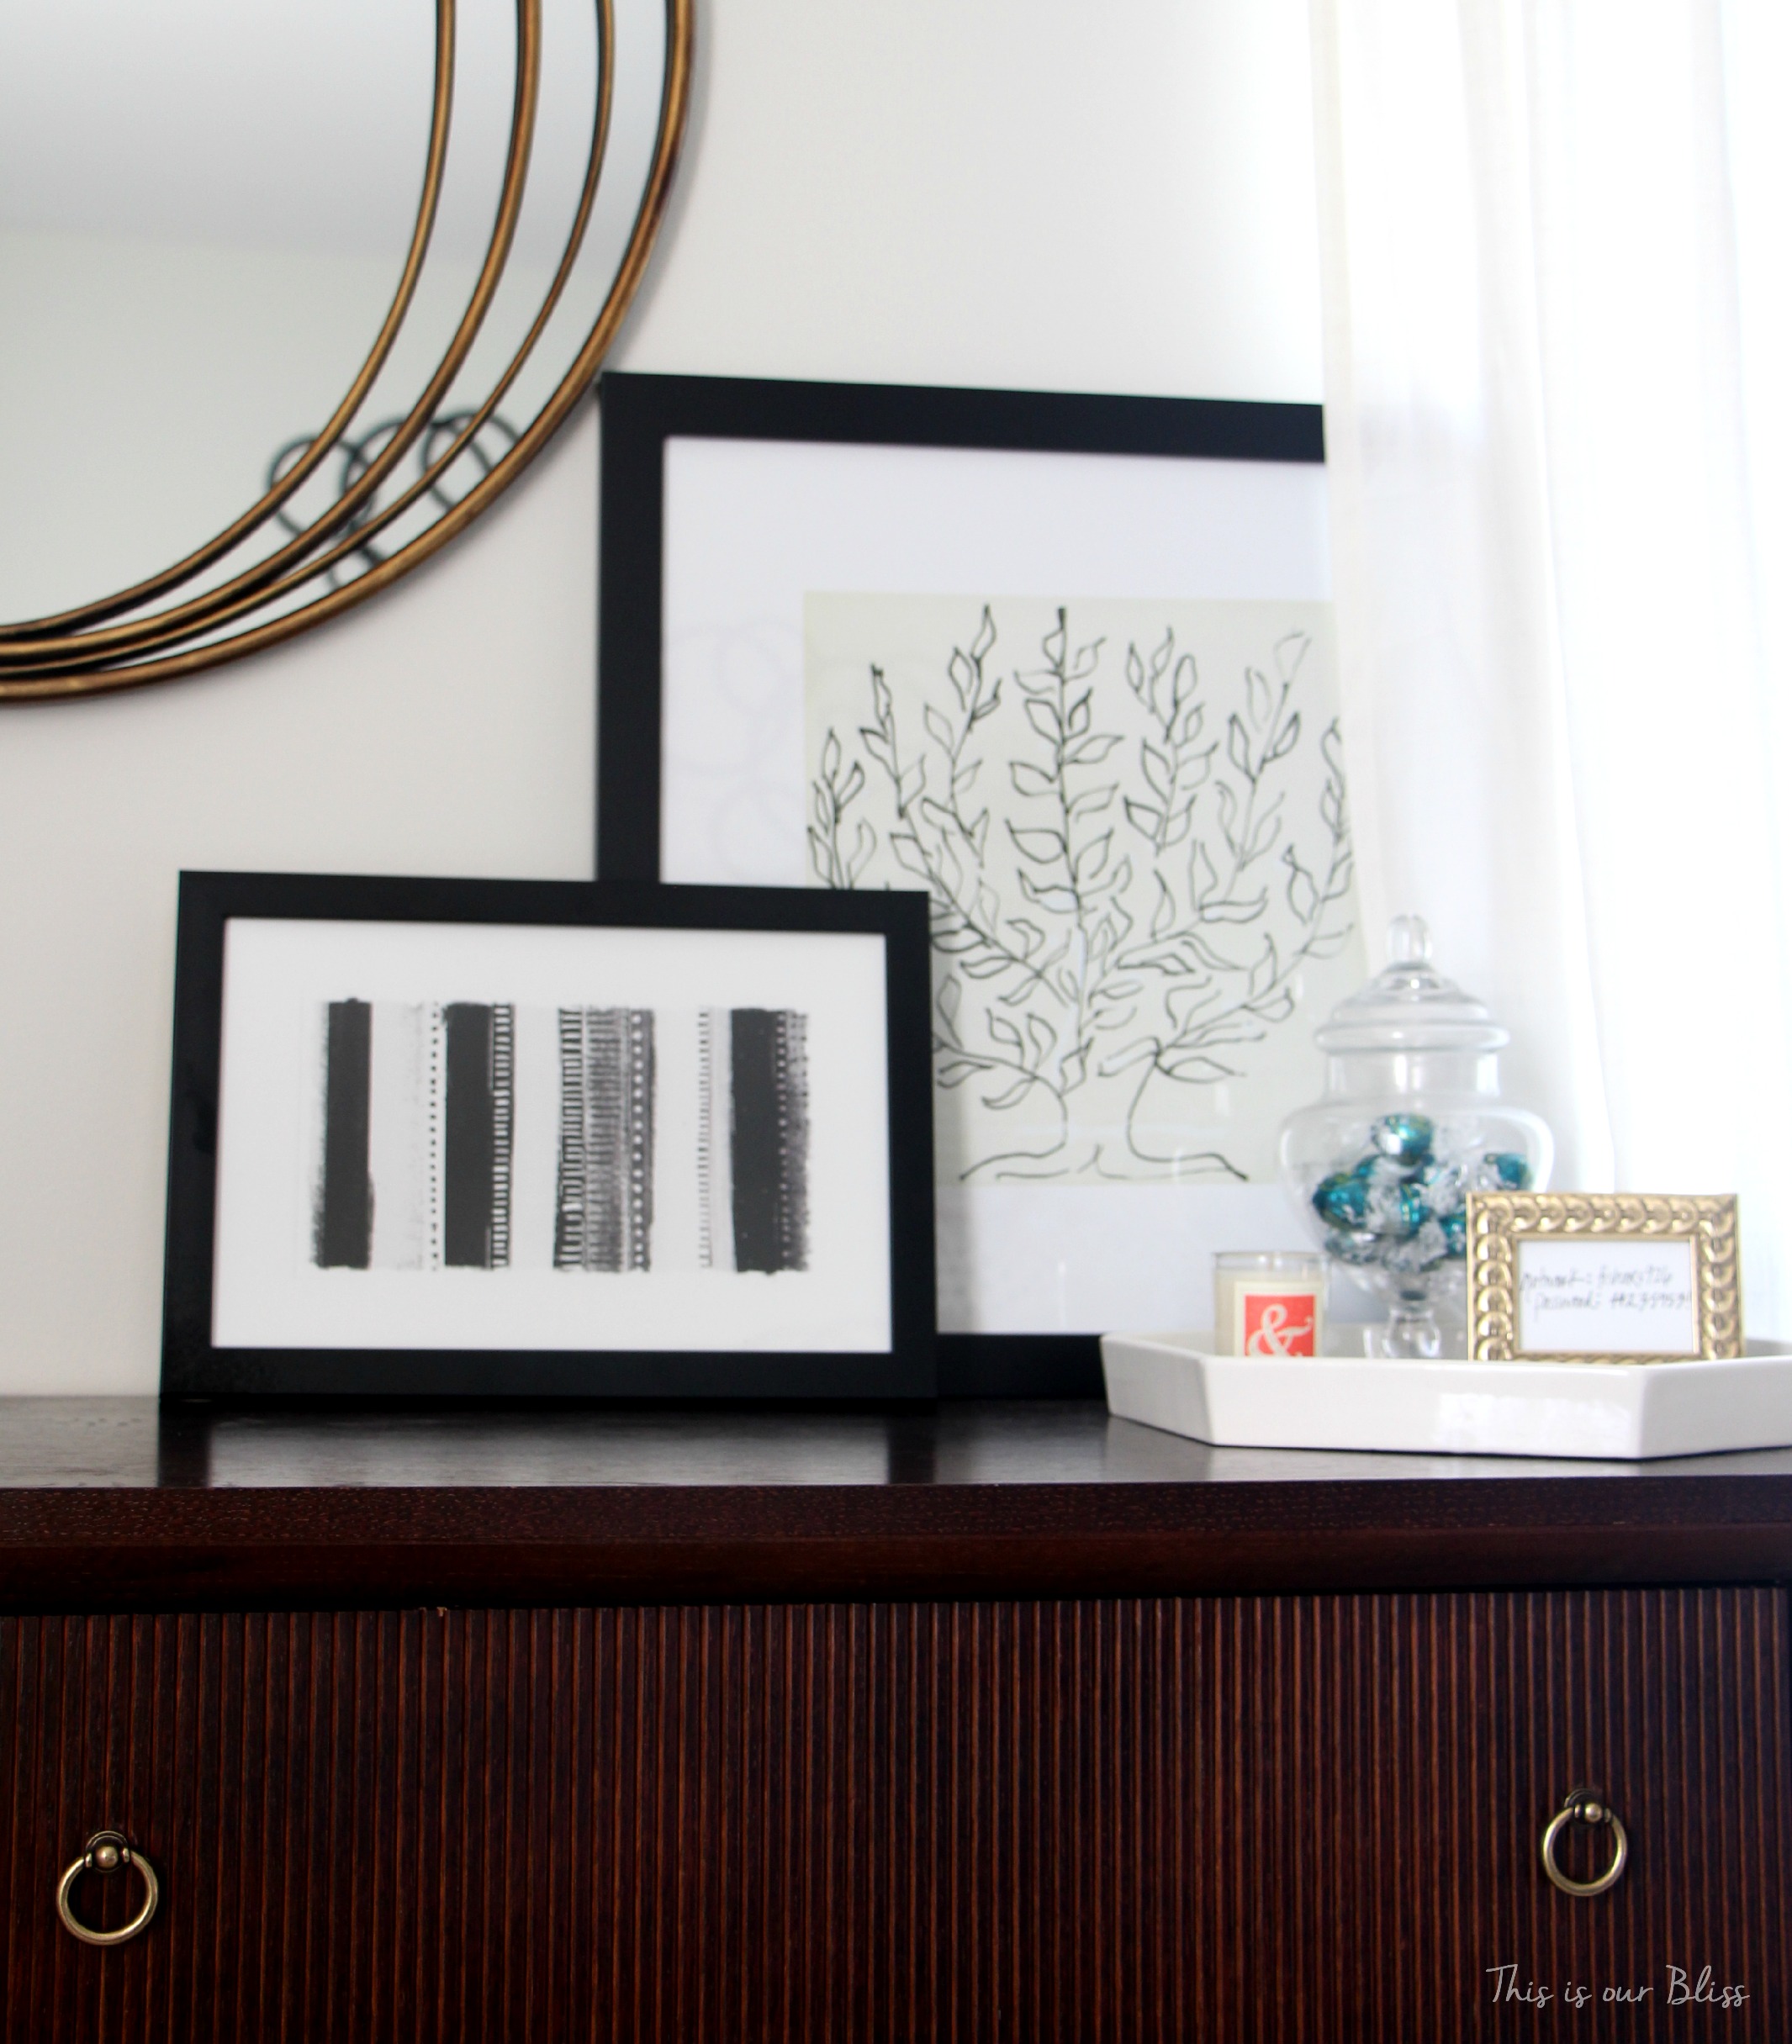 guestroom Revamp - guestroom dresser - leaning art - tray - This is our Bliss